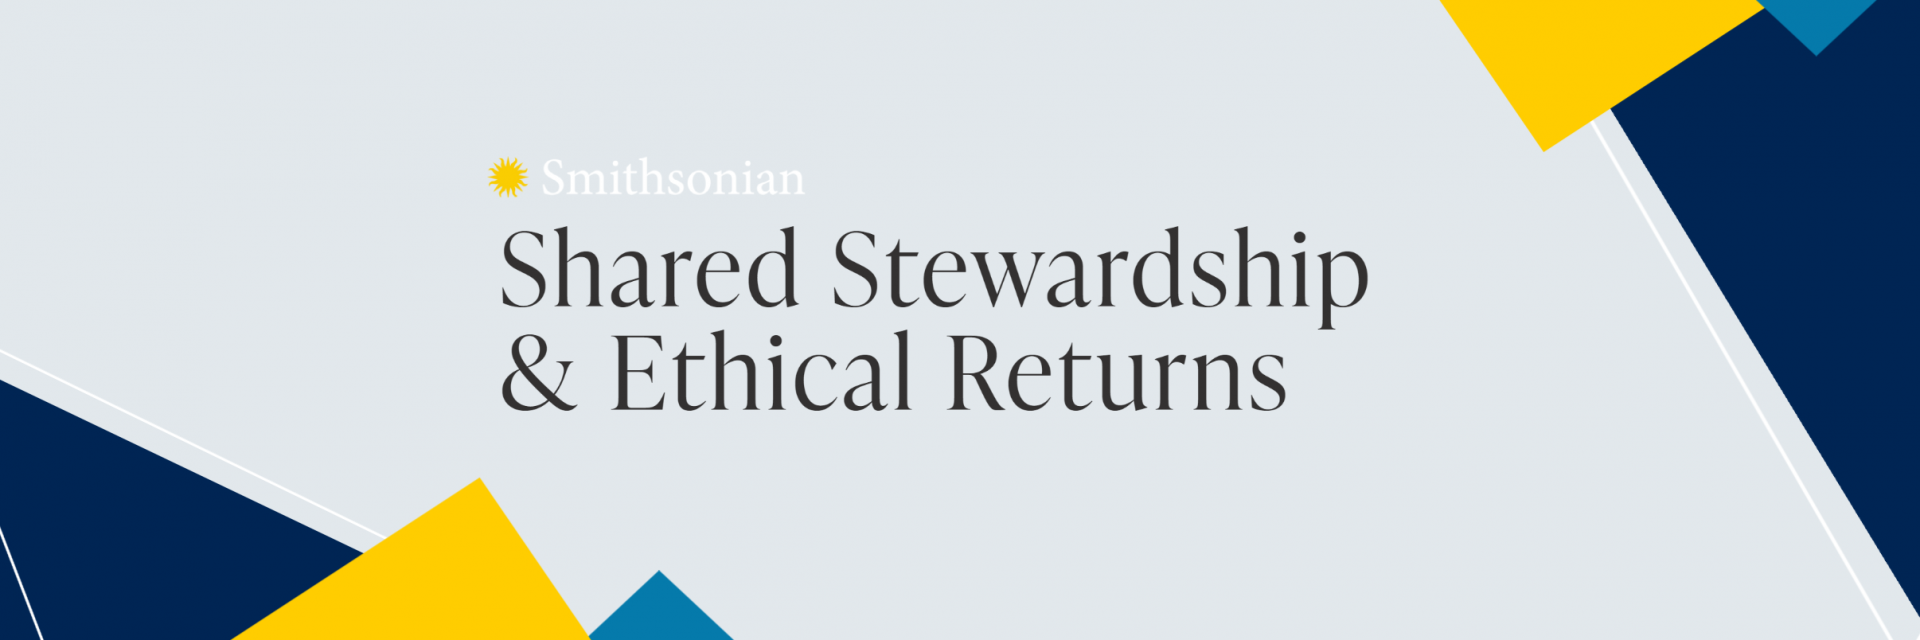 Shared Stewardship and Ethical Returns